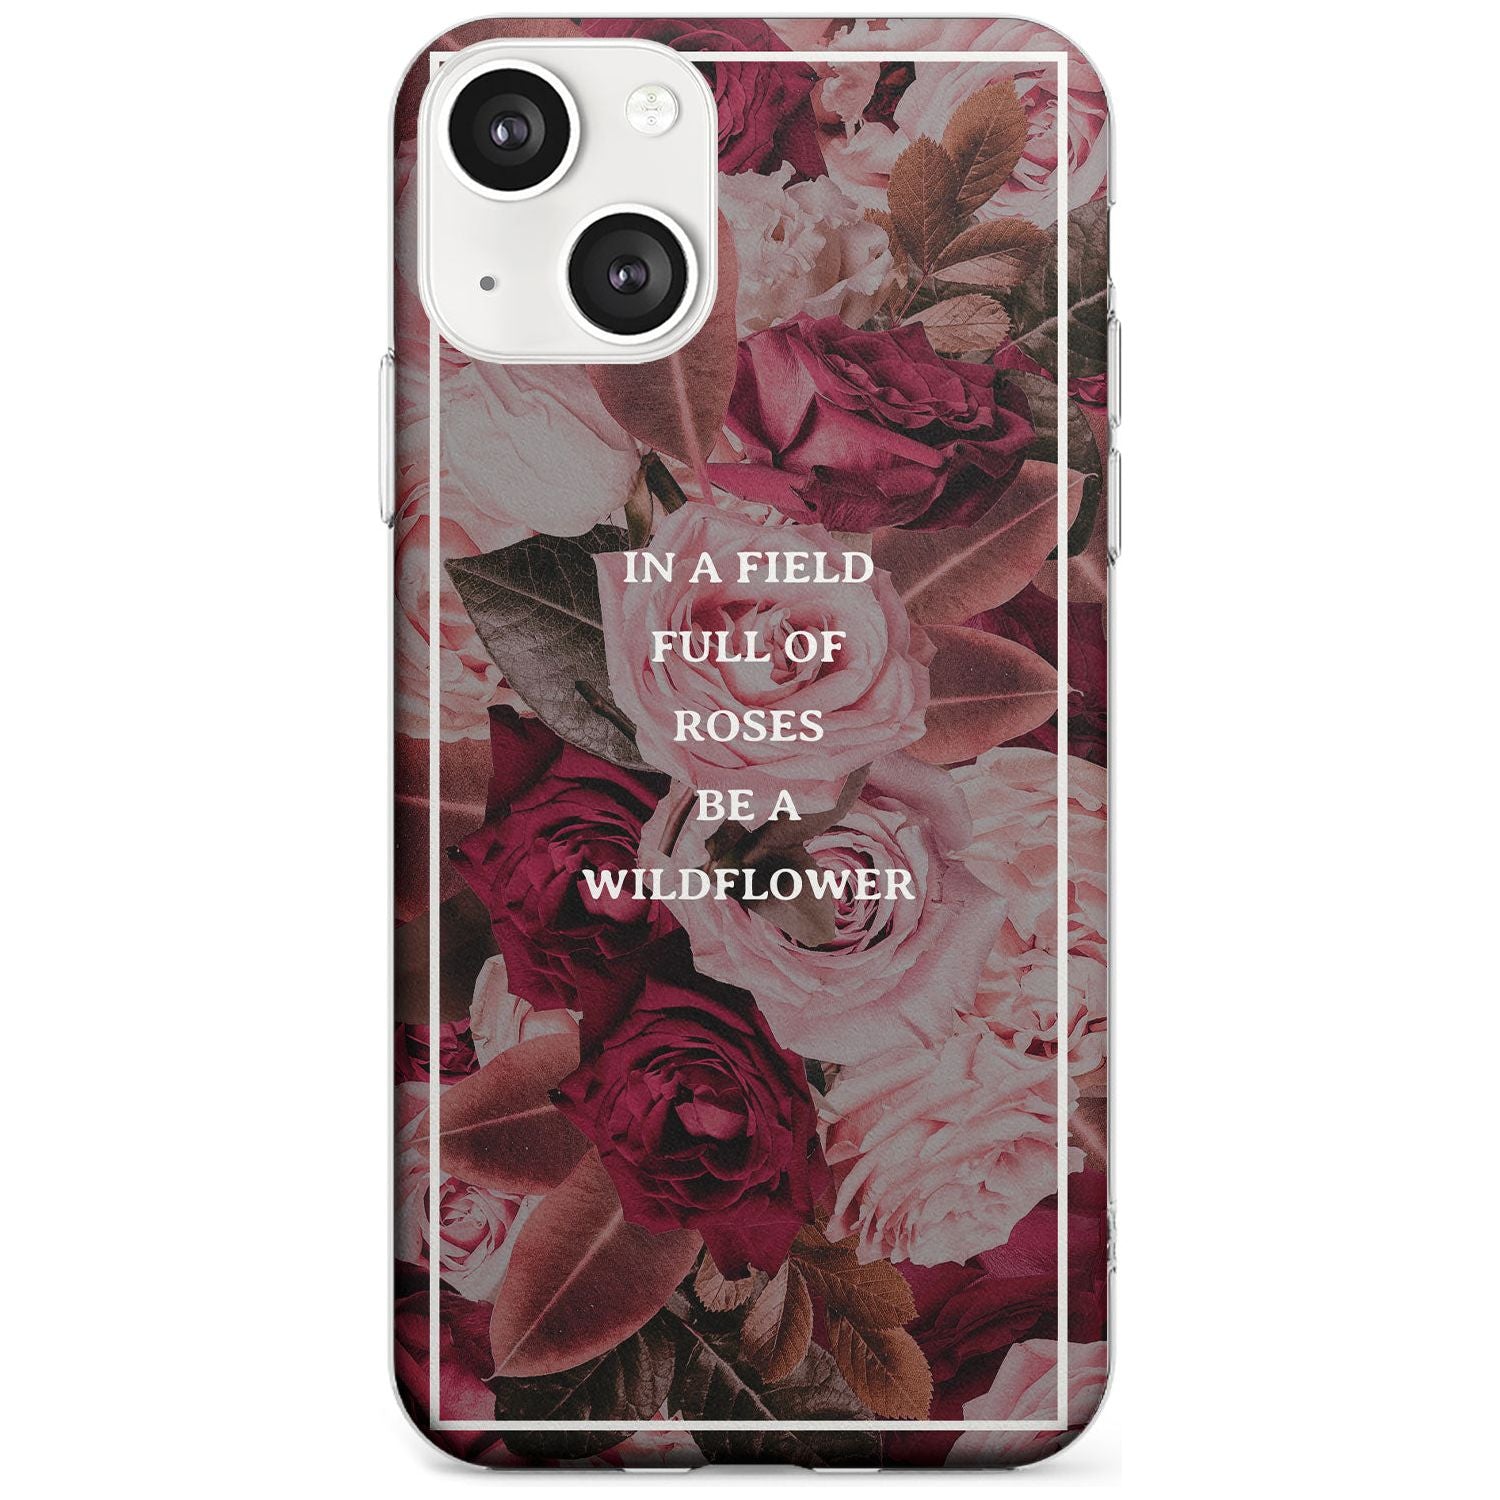 Be a Wildflower Floral Quote